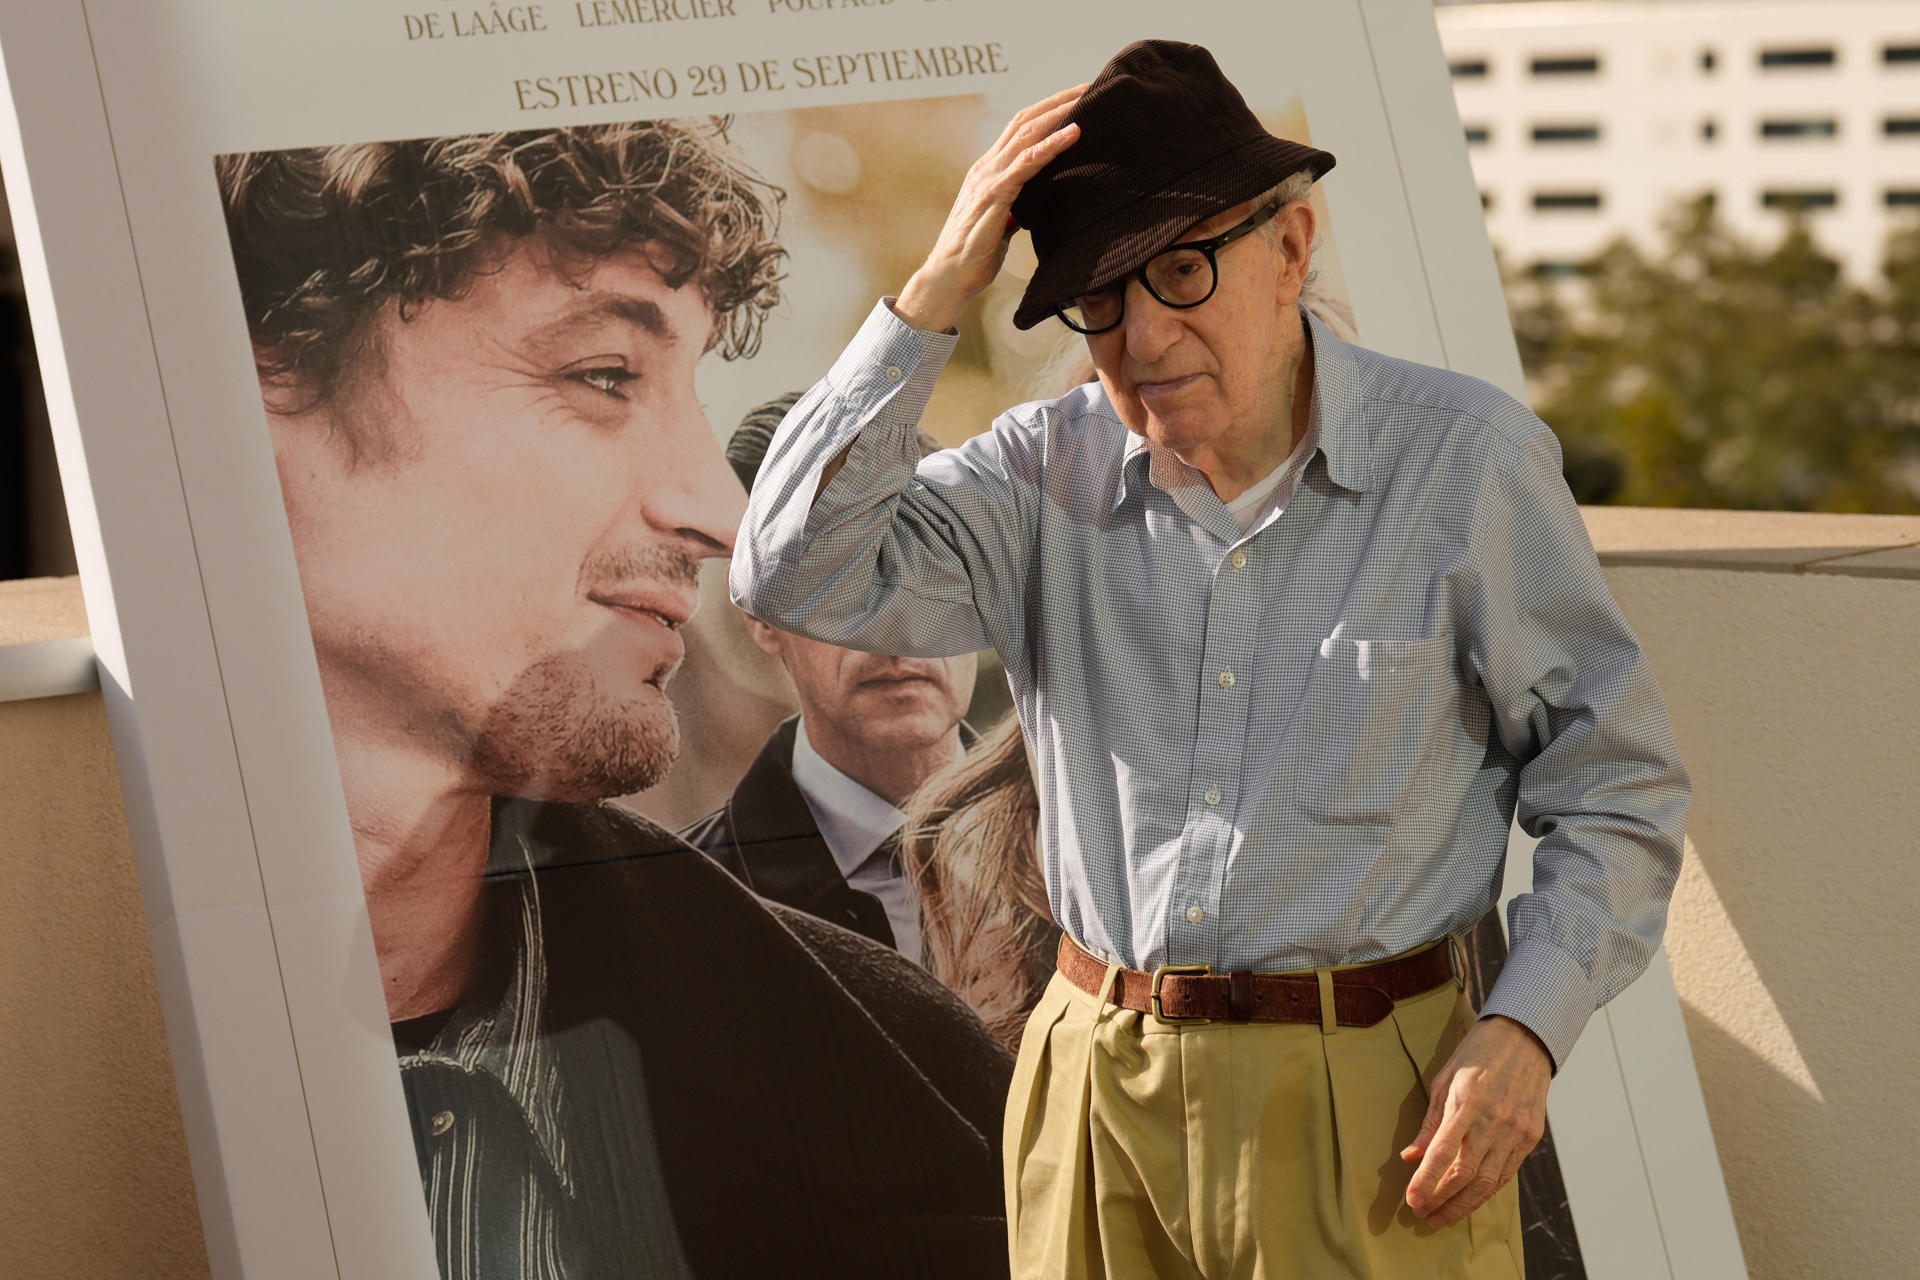 US film director Woody Allen poses during the premiere of "Coup de Chance" on Sept. 18 in Barcelona.EFE/Enric Fontcuberta